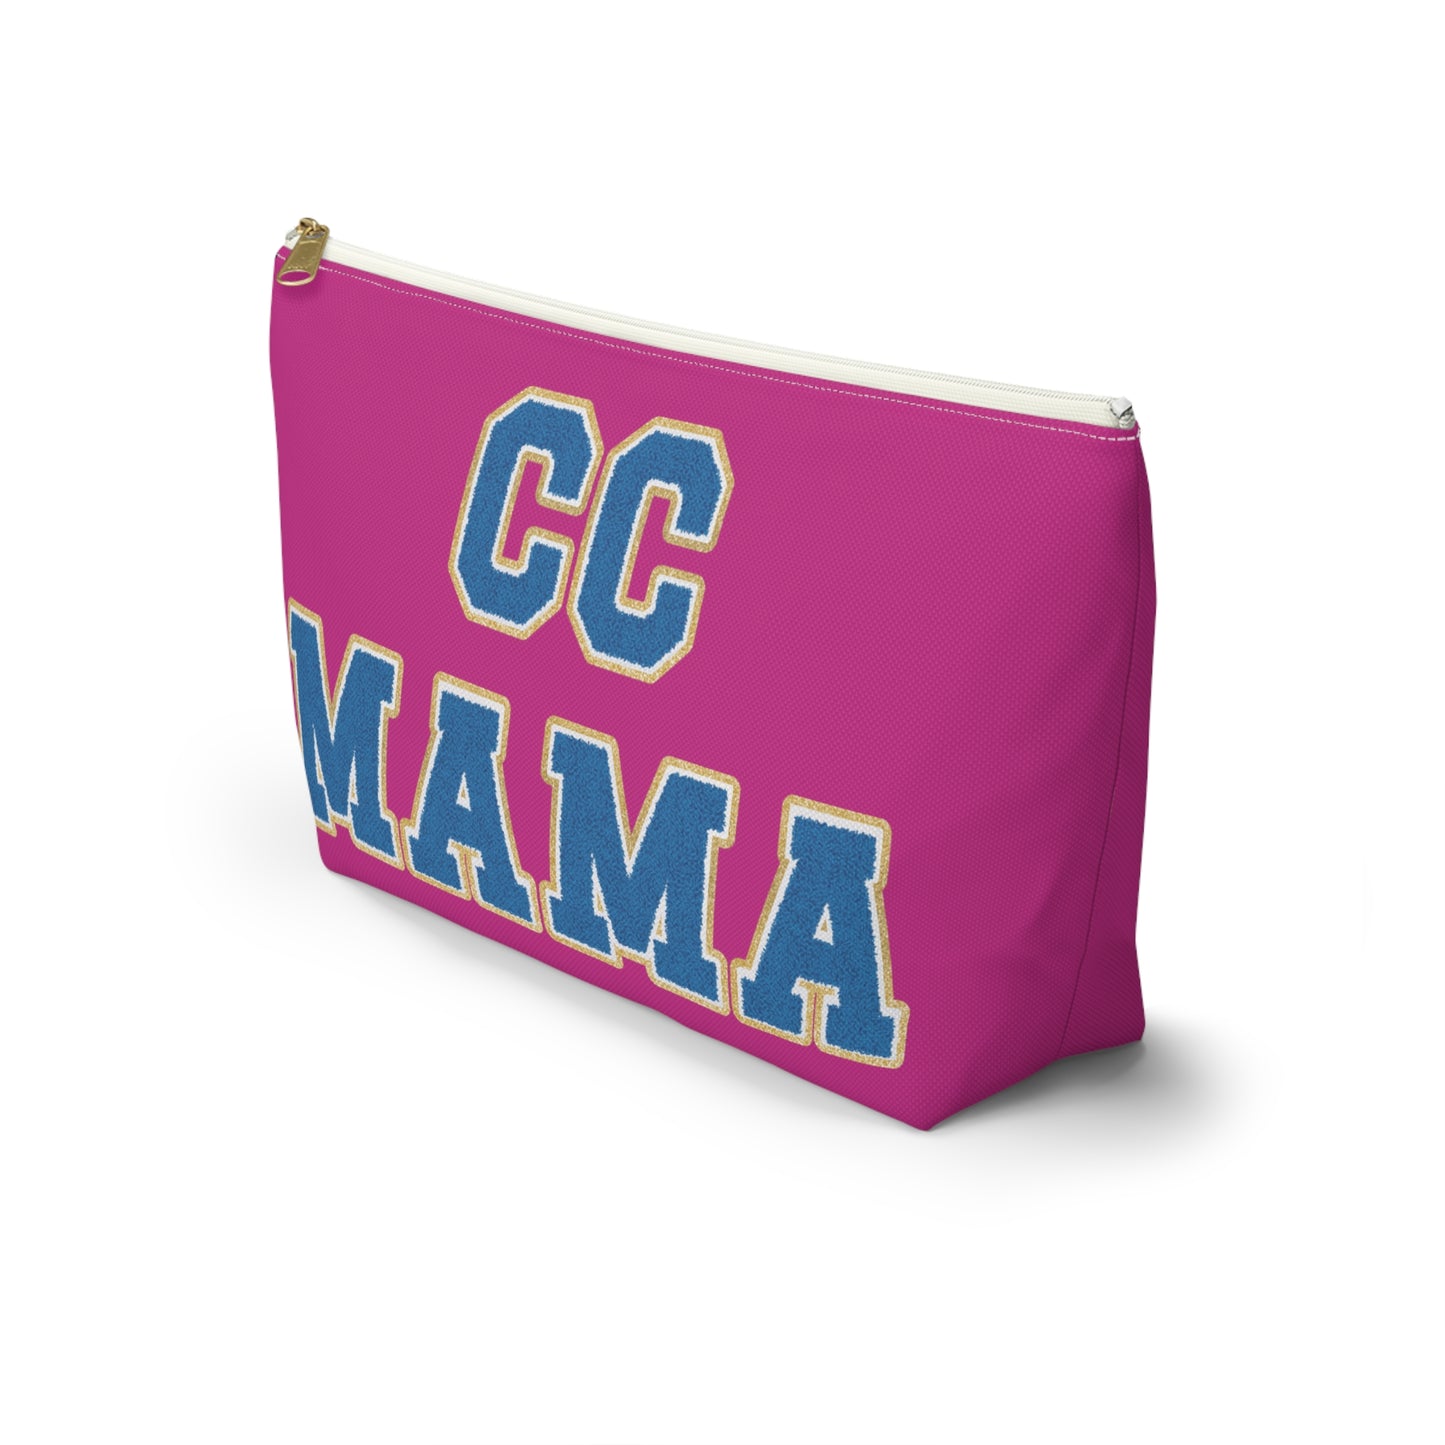 CC Mama Varsity Lettered Pink Zippered pouch